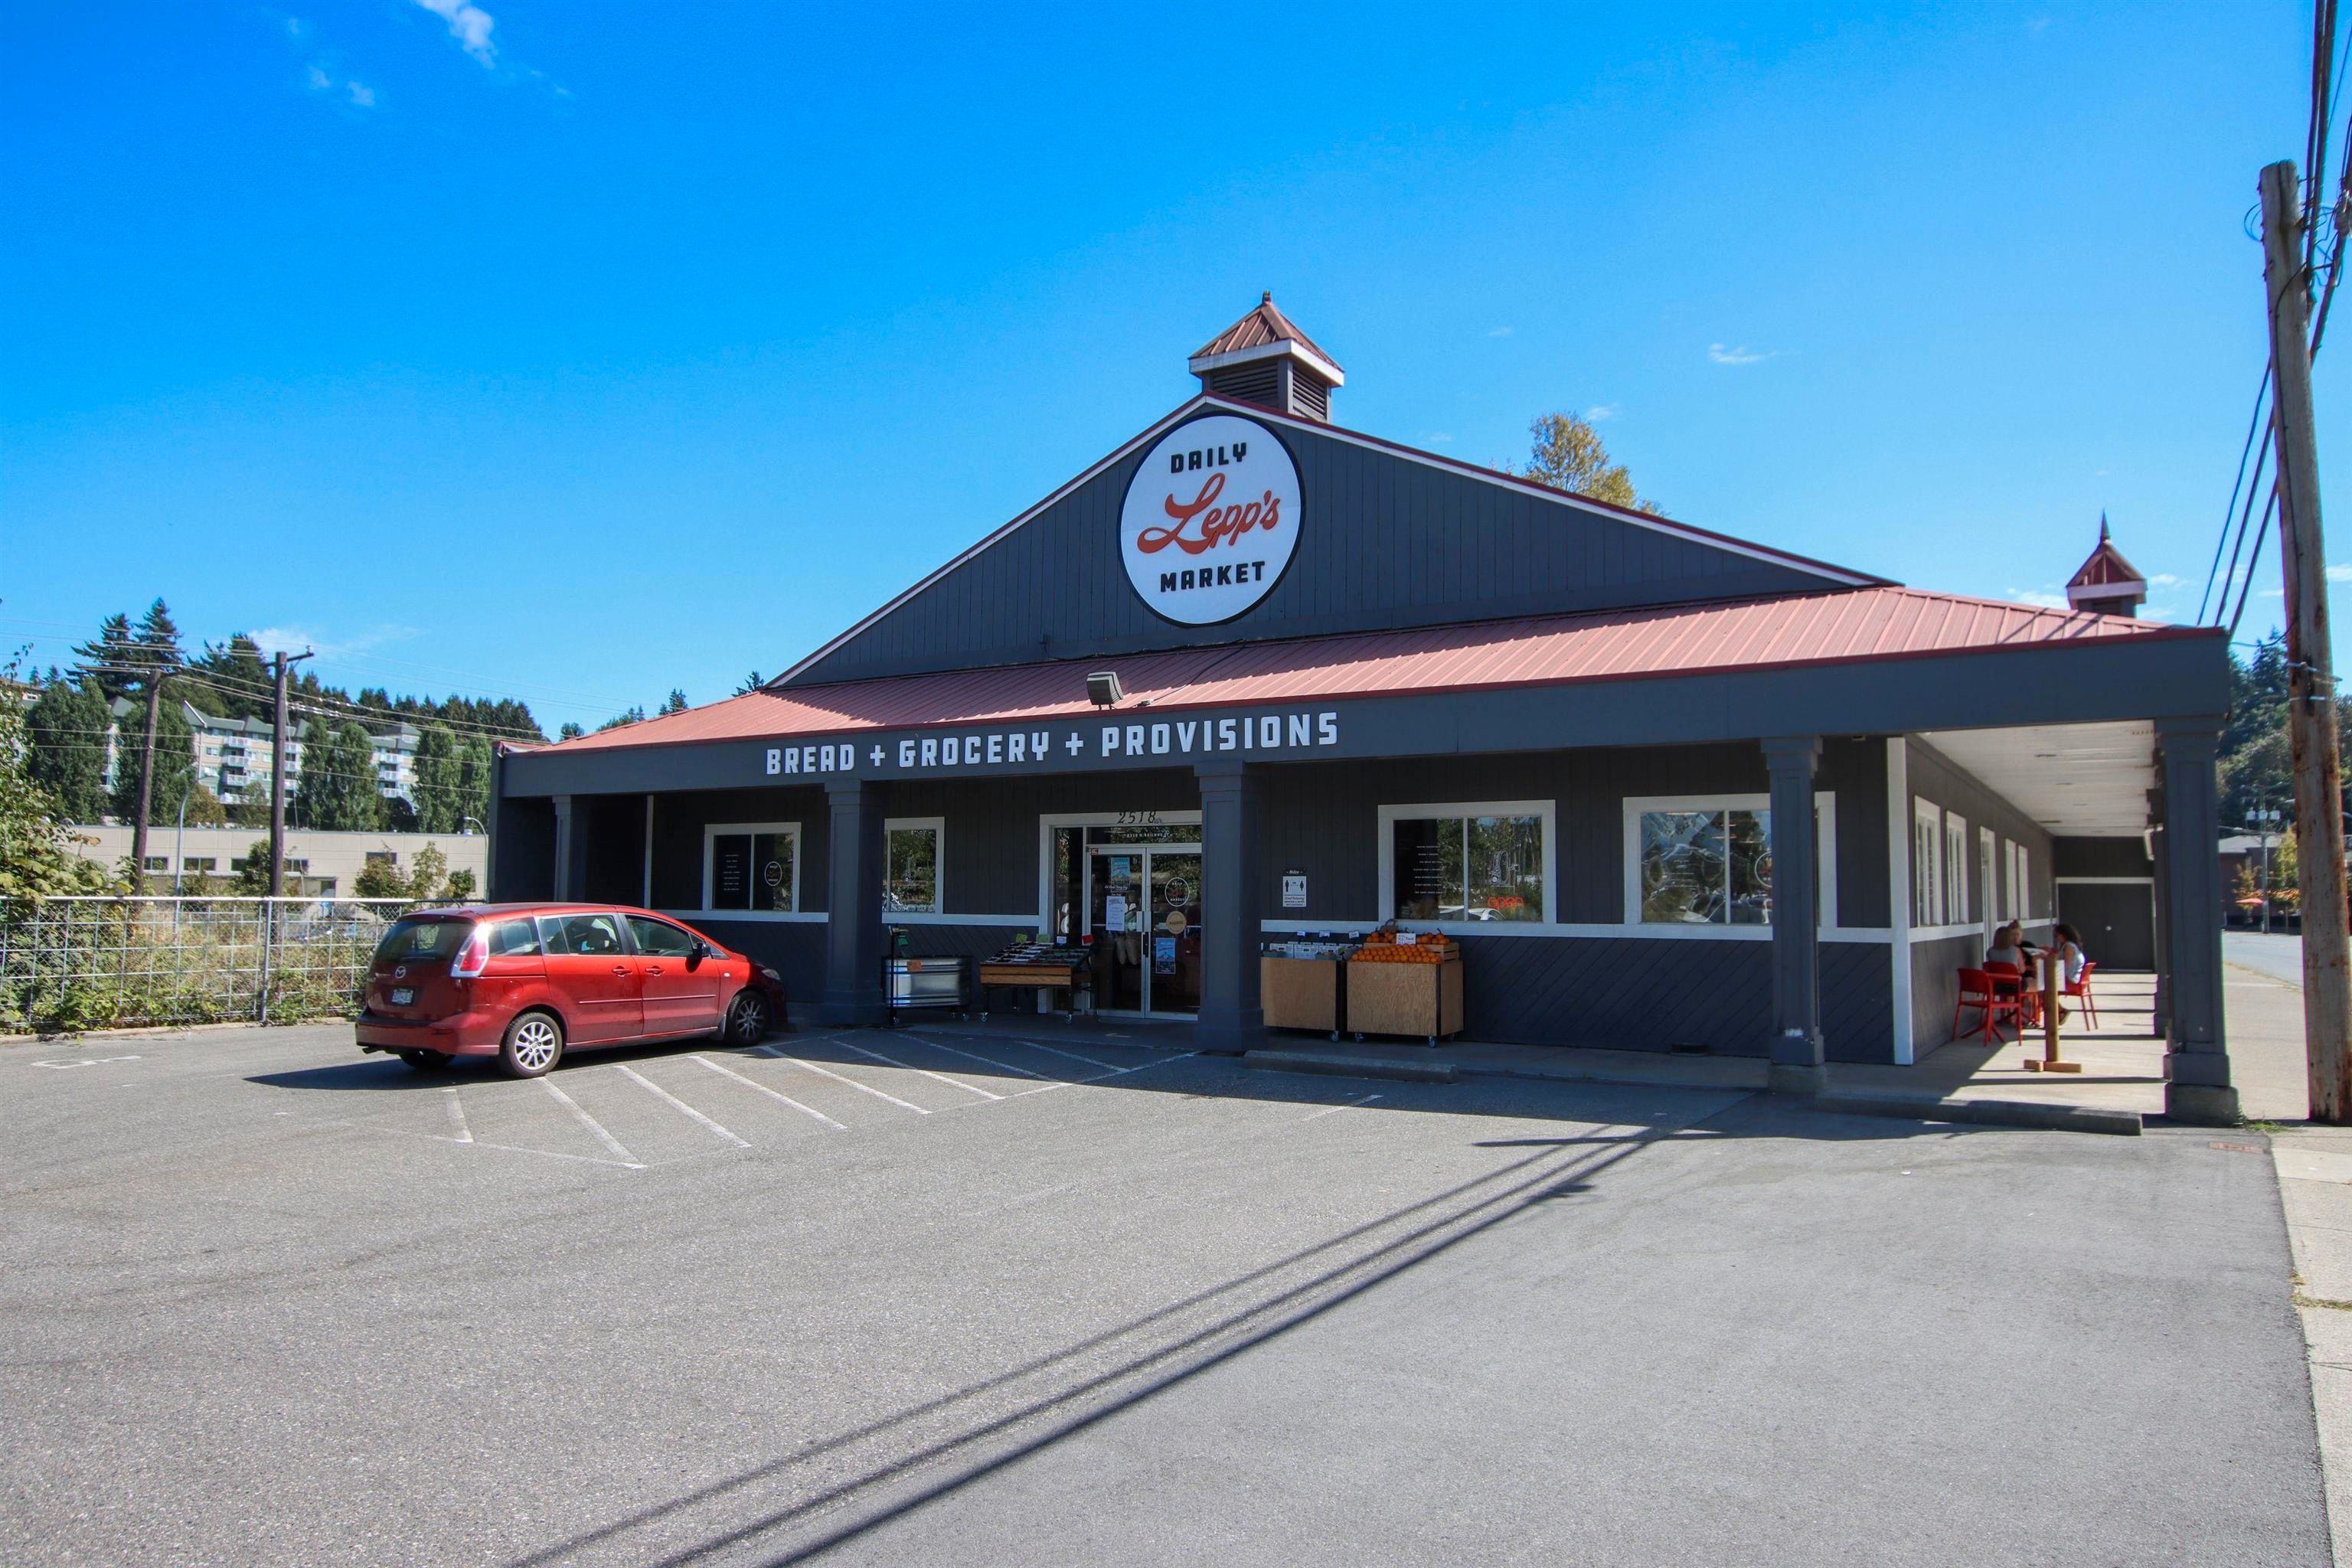 Main Photo: 2518 W RAILWAY Street in Abbotsford: Central Abbotsford Business for sale : MLS®# C8046592